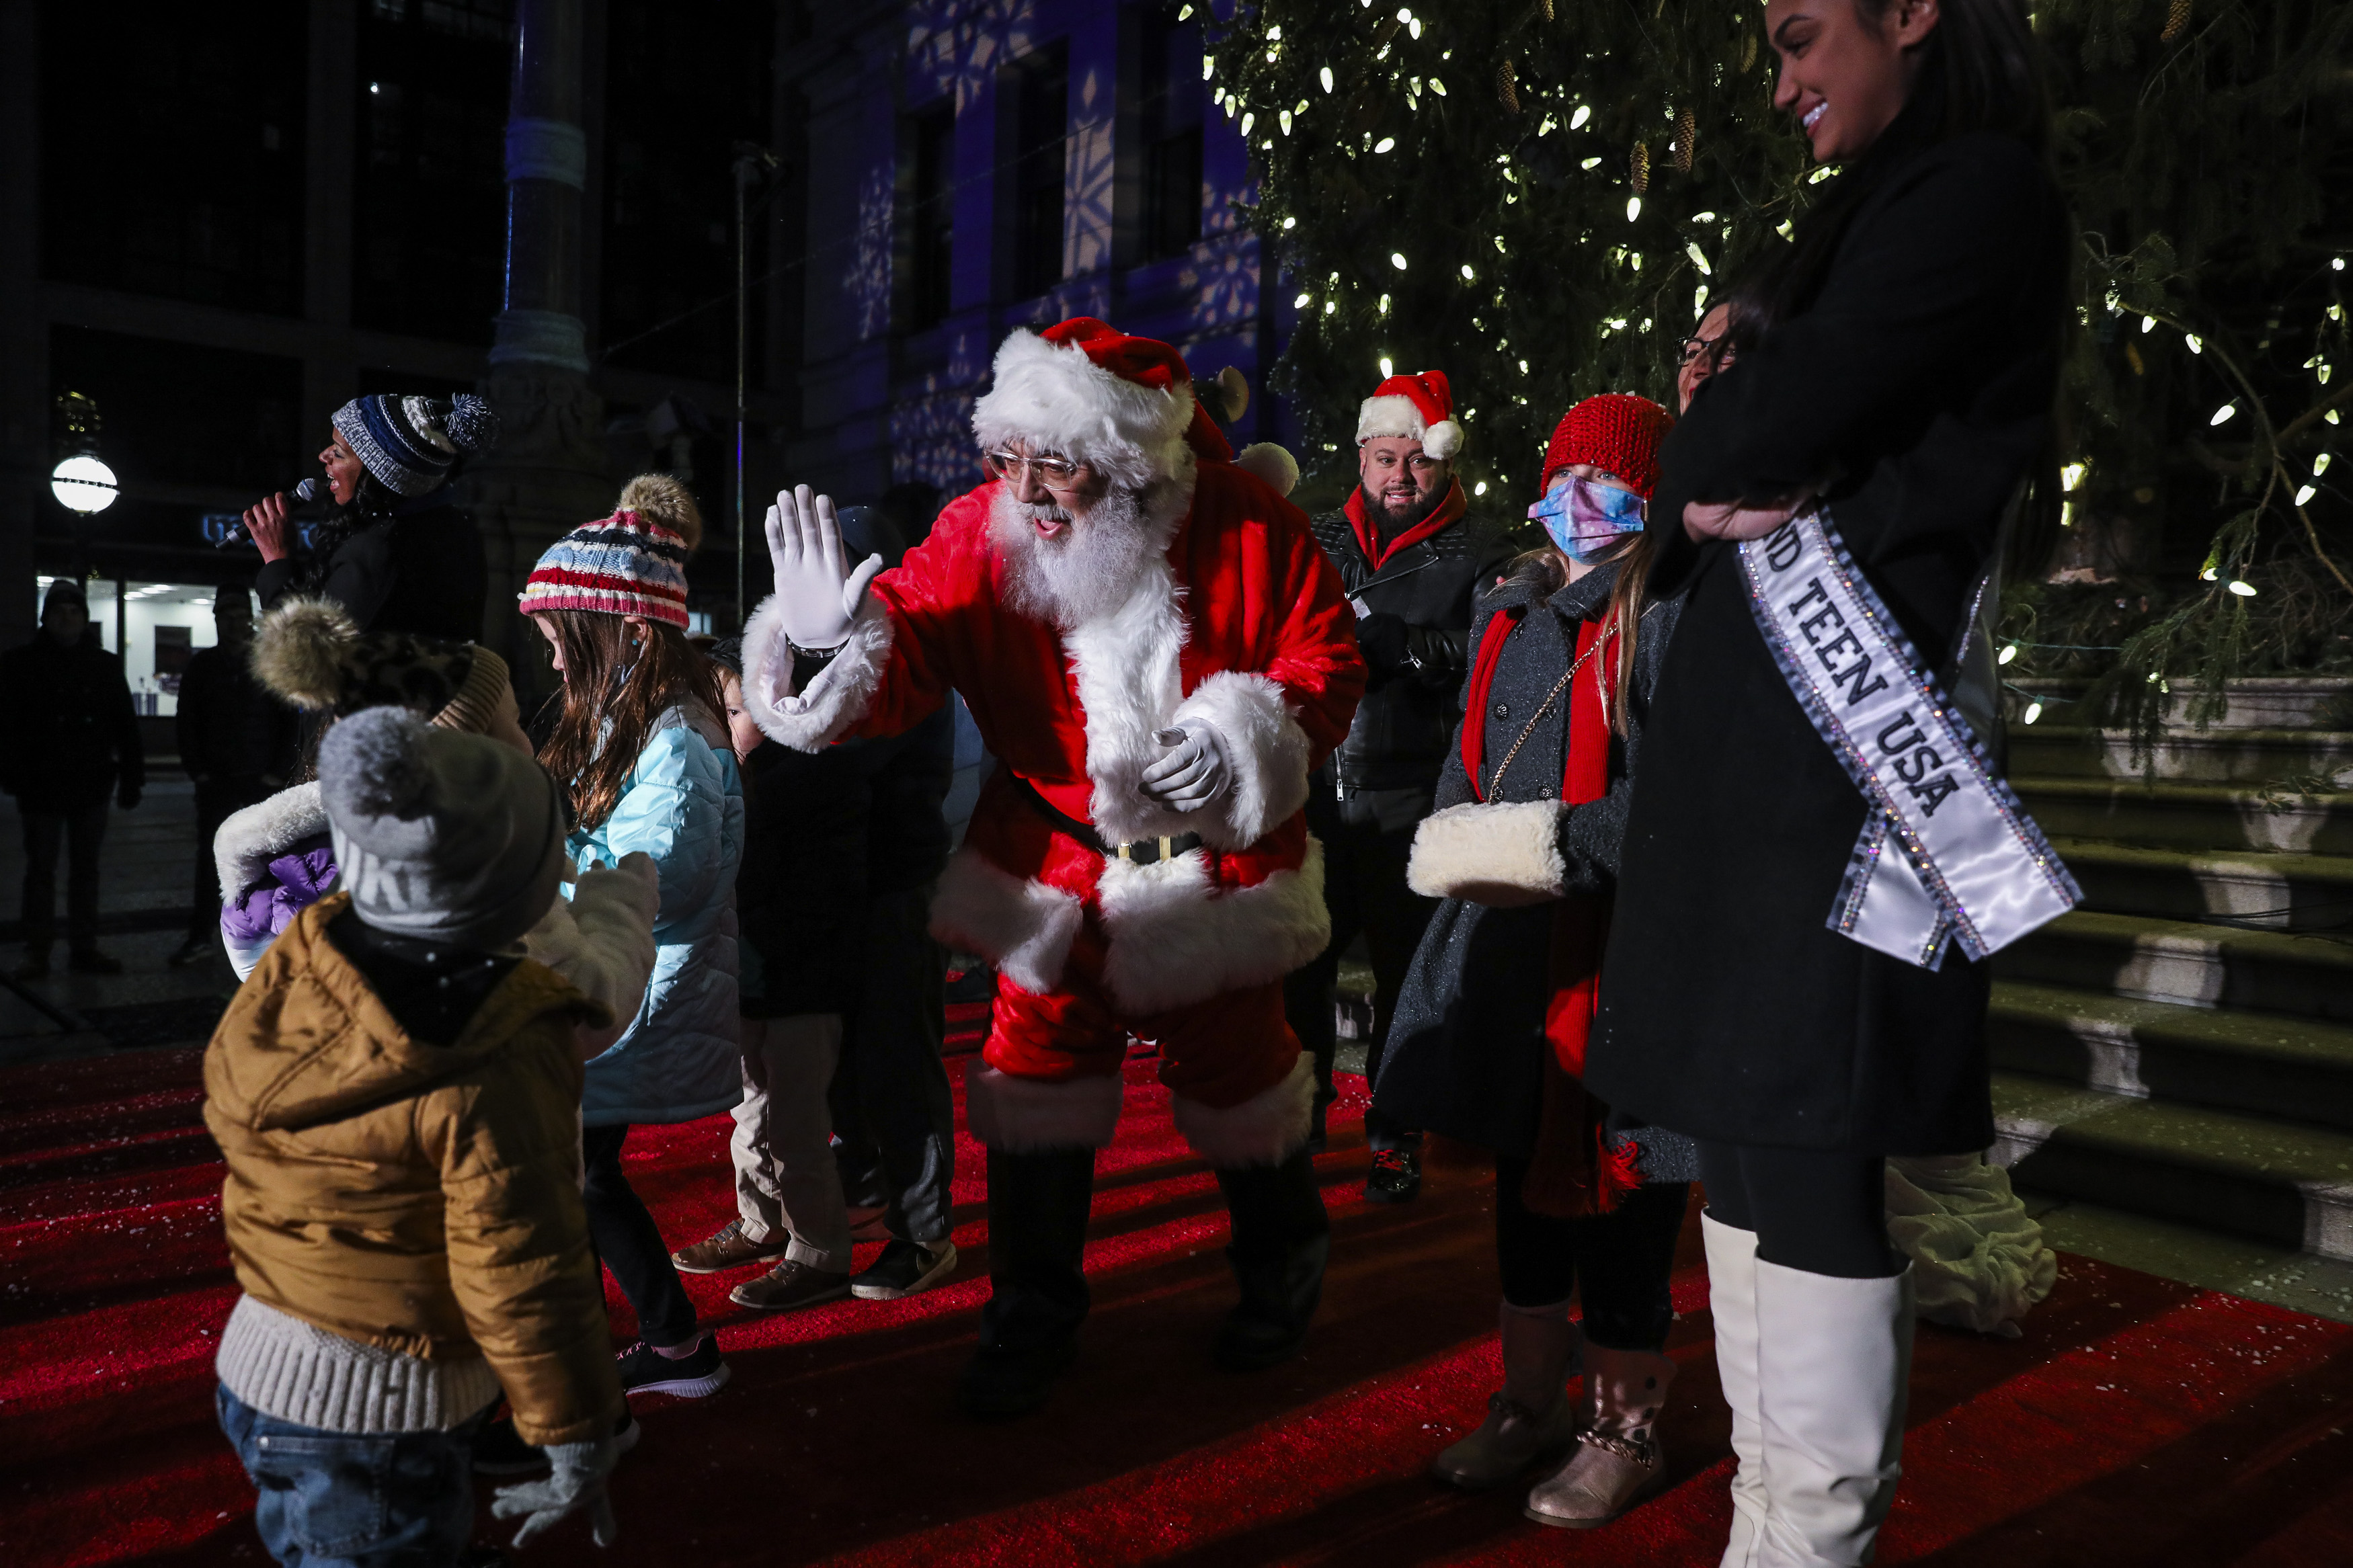 Santa is raising five children while attending the annual tree lighting at Providence Town Hall.